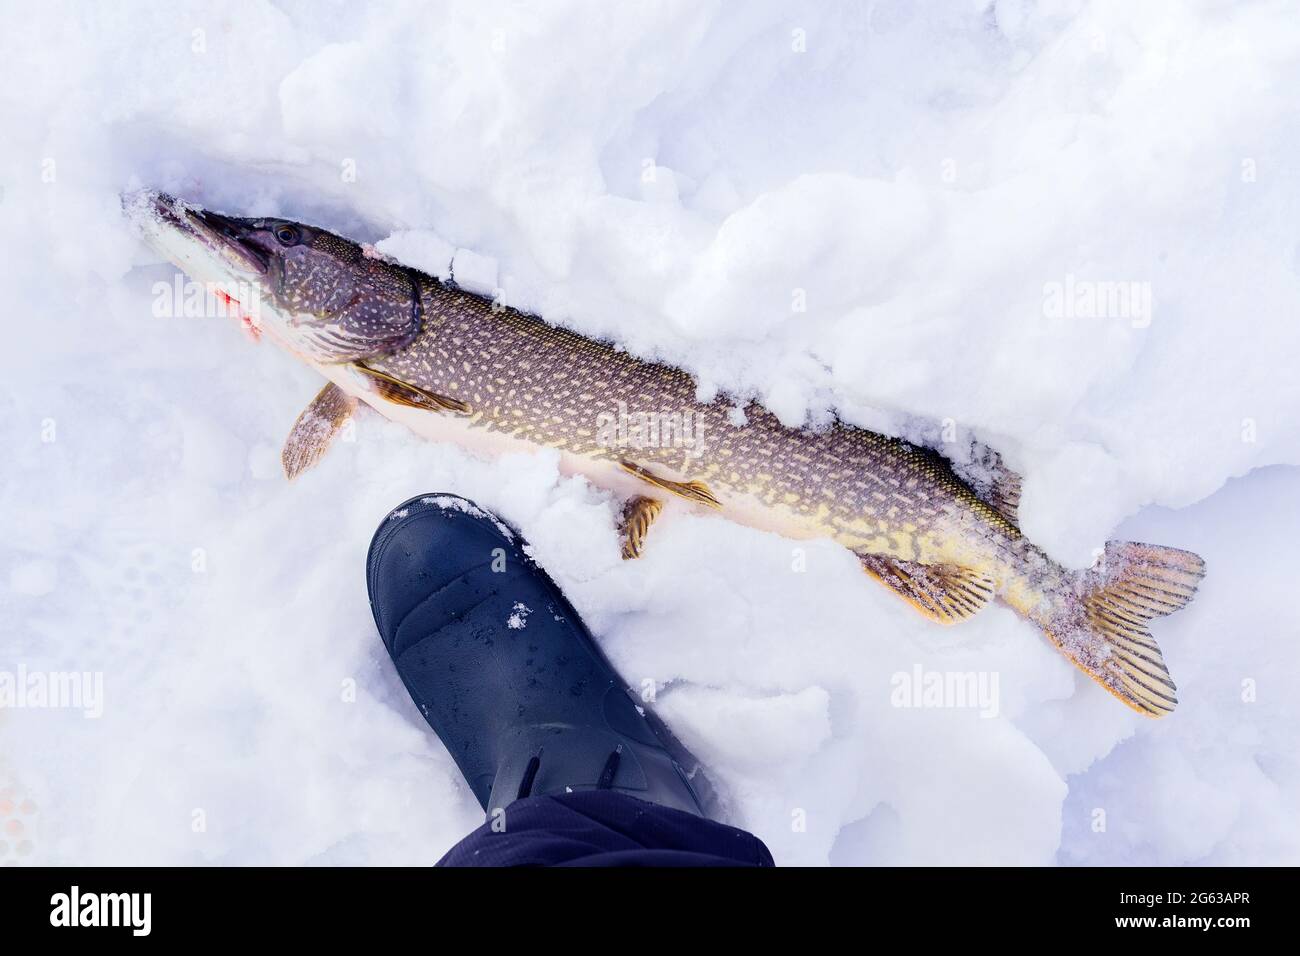 Northern Pike while ice fishing lies on snow in winter Stock Photo